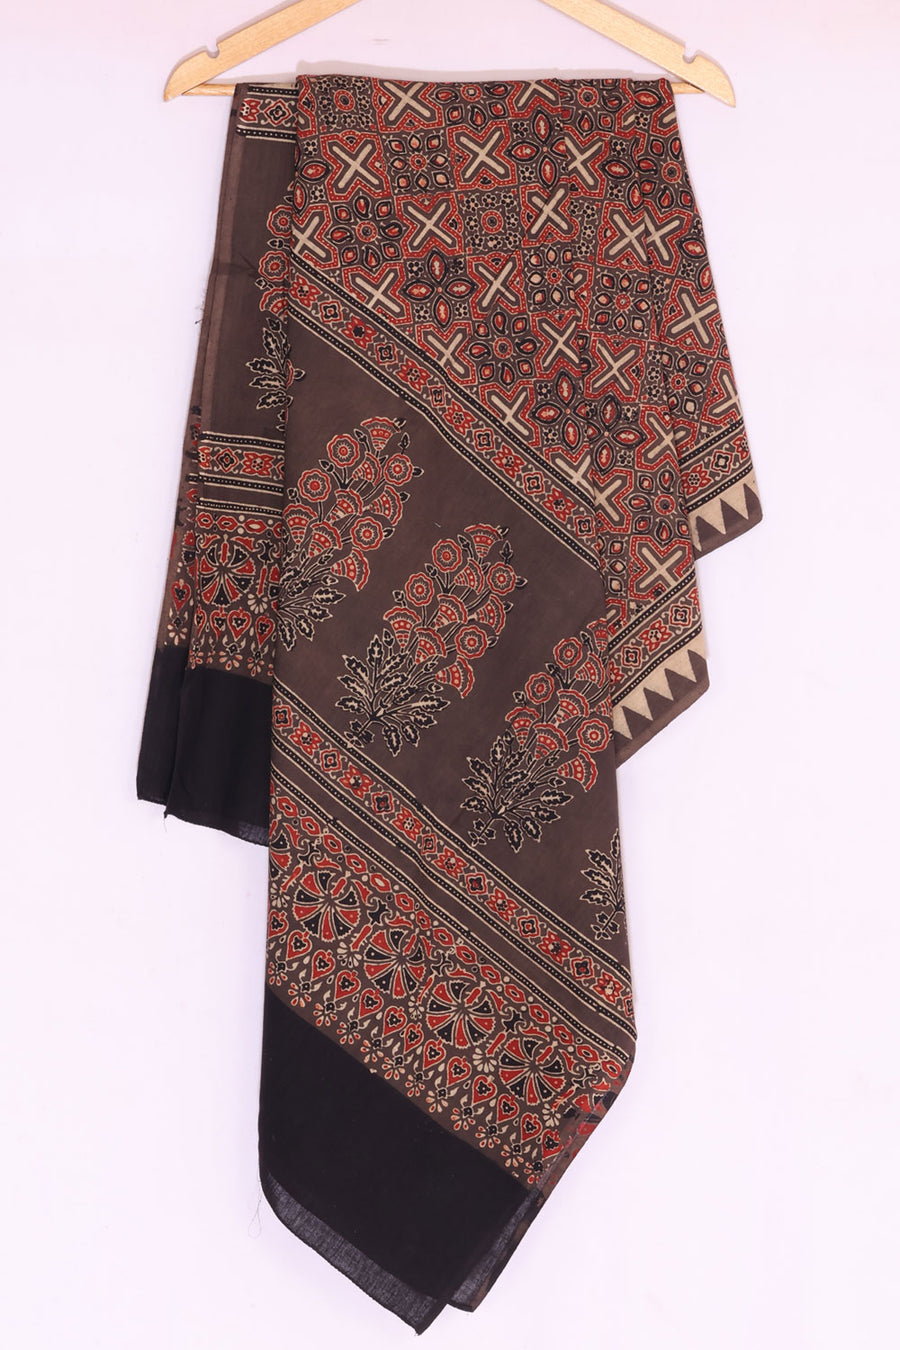 Hand Block Printed Ajrakh Dupatta In Cotton Silk with Floral and Leaf Motifs Design